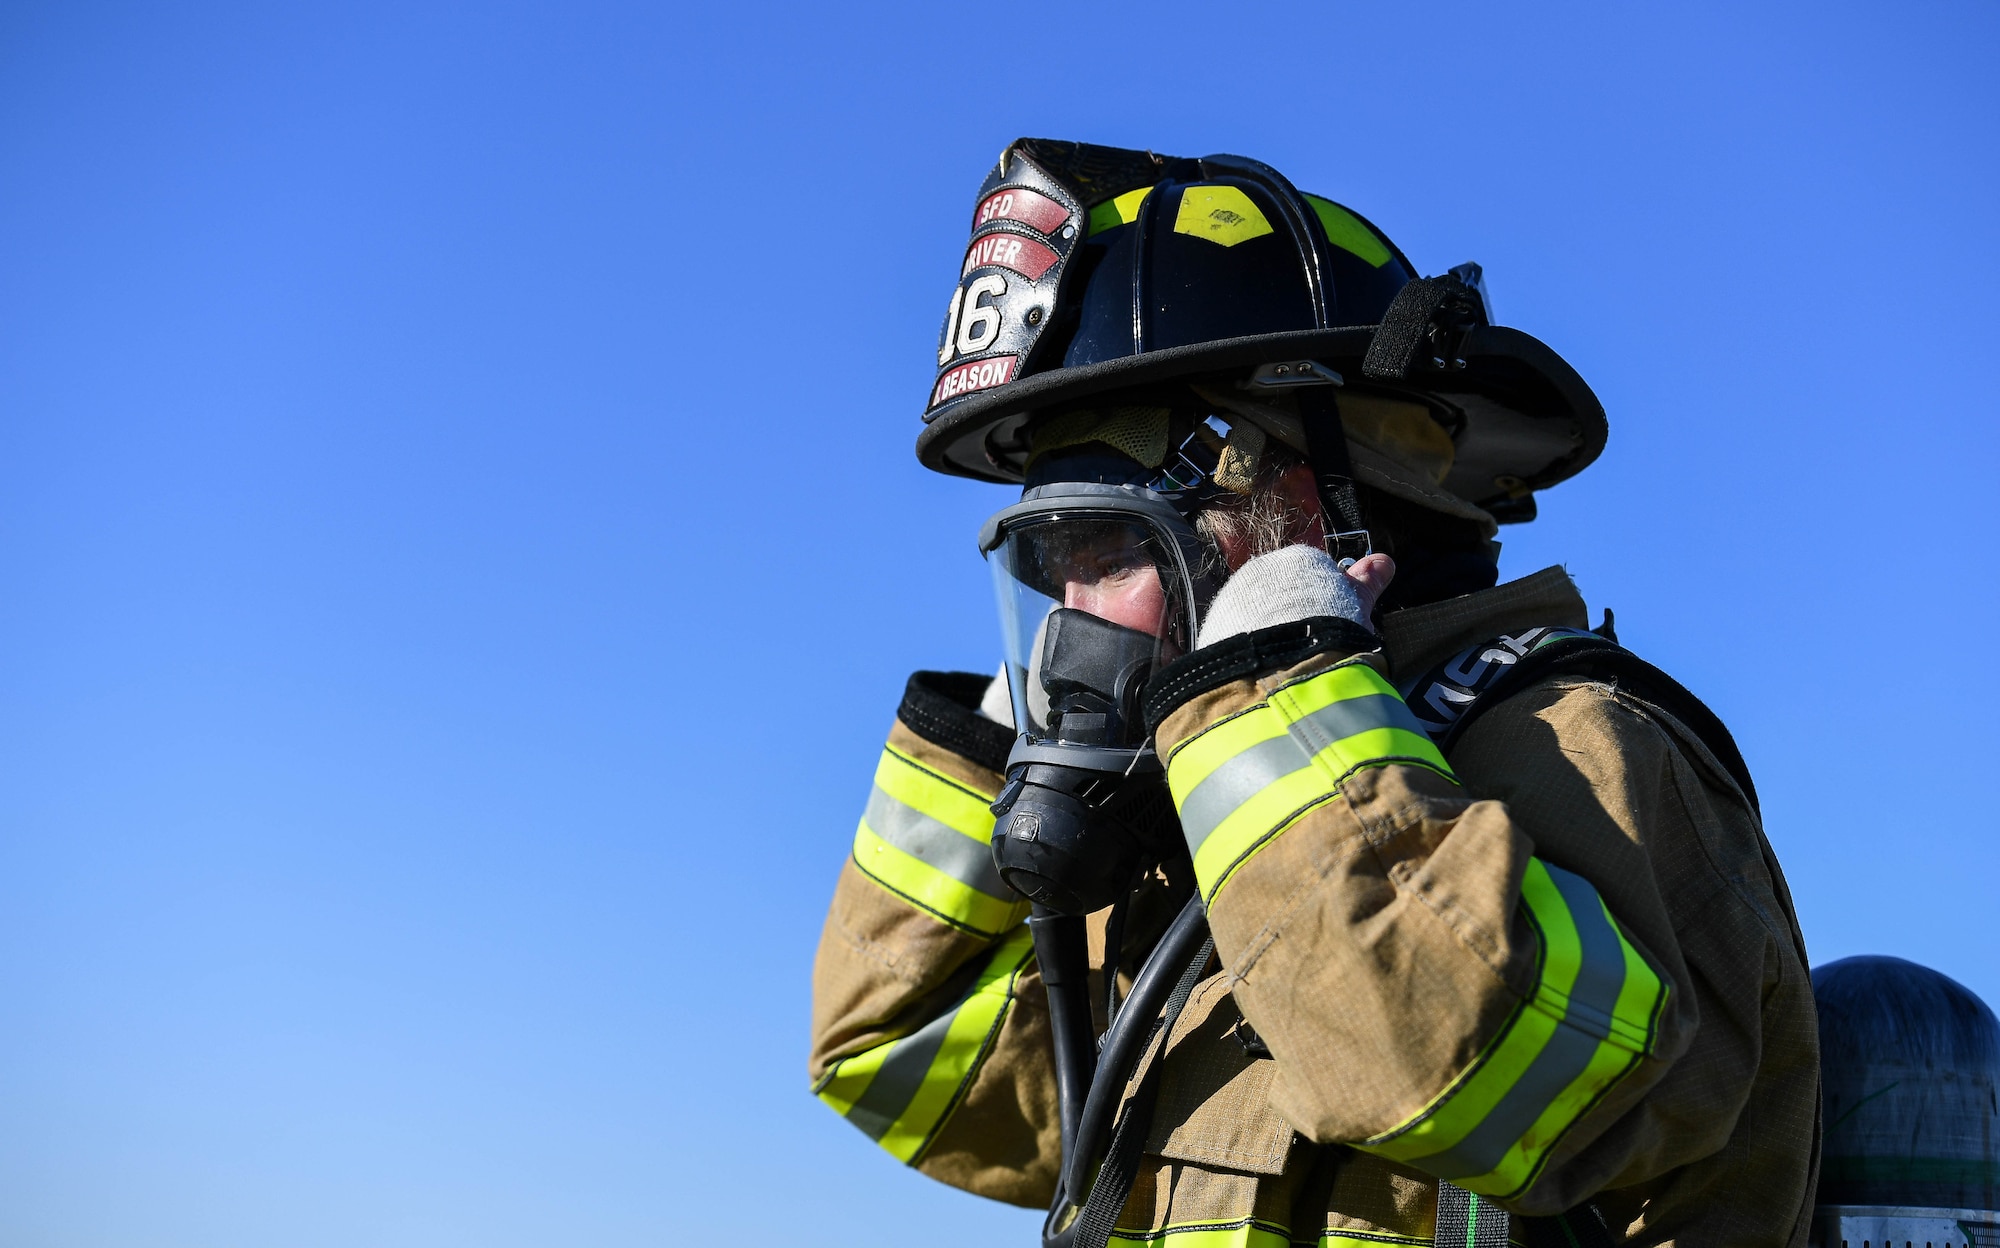 A Shreveport Fire Department firefighter adjusts her headgear during a live fire training exercise March 21, 2019, at Barksdale Air Force Base, Louisiana. Shreveport Fire Department conducts annual live fire training to complete their Federal Aviation Administration required training. (U.S. Air Force photo by Airman Jacob B. Wrightsman)